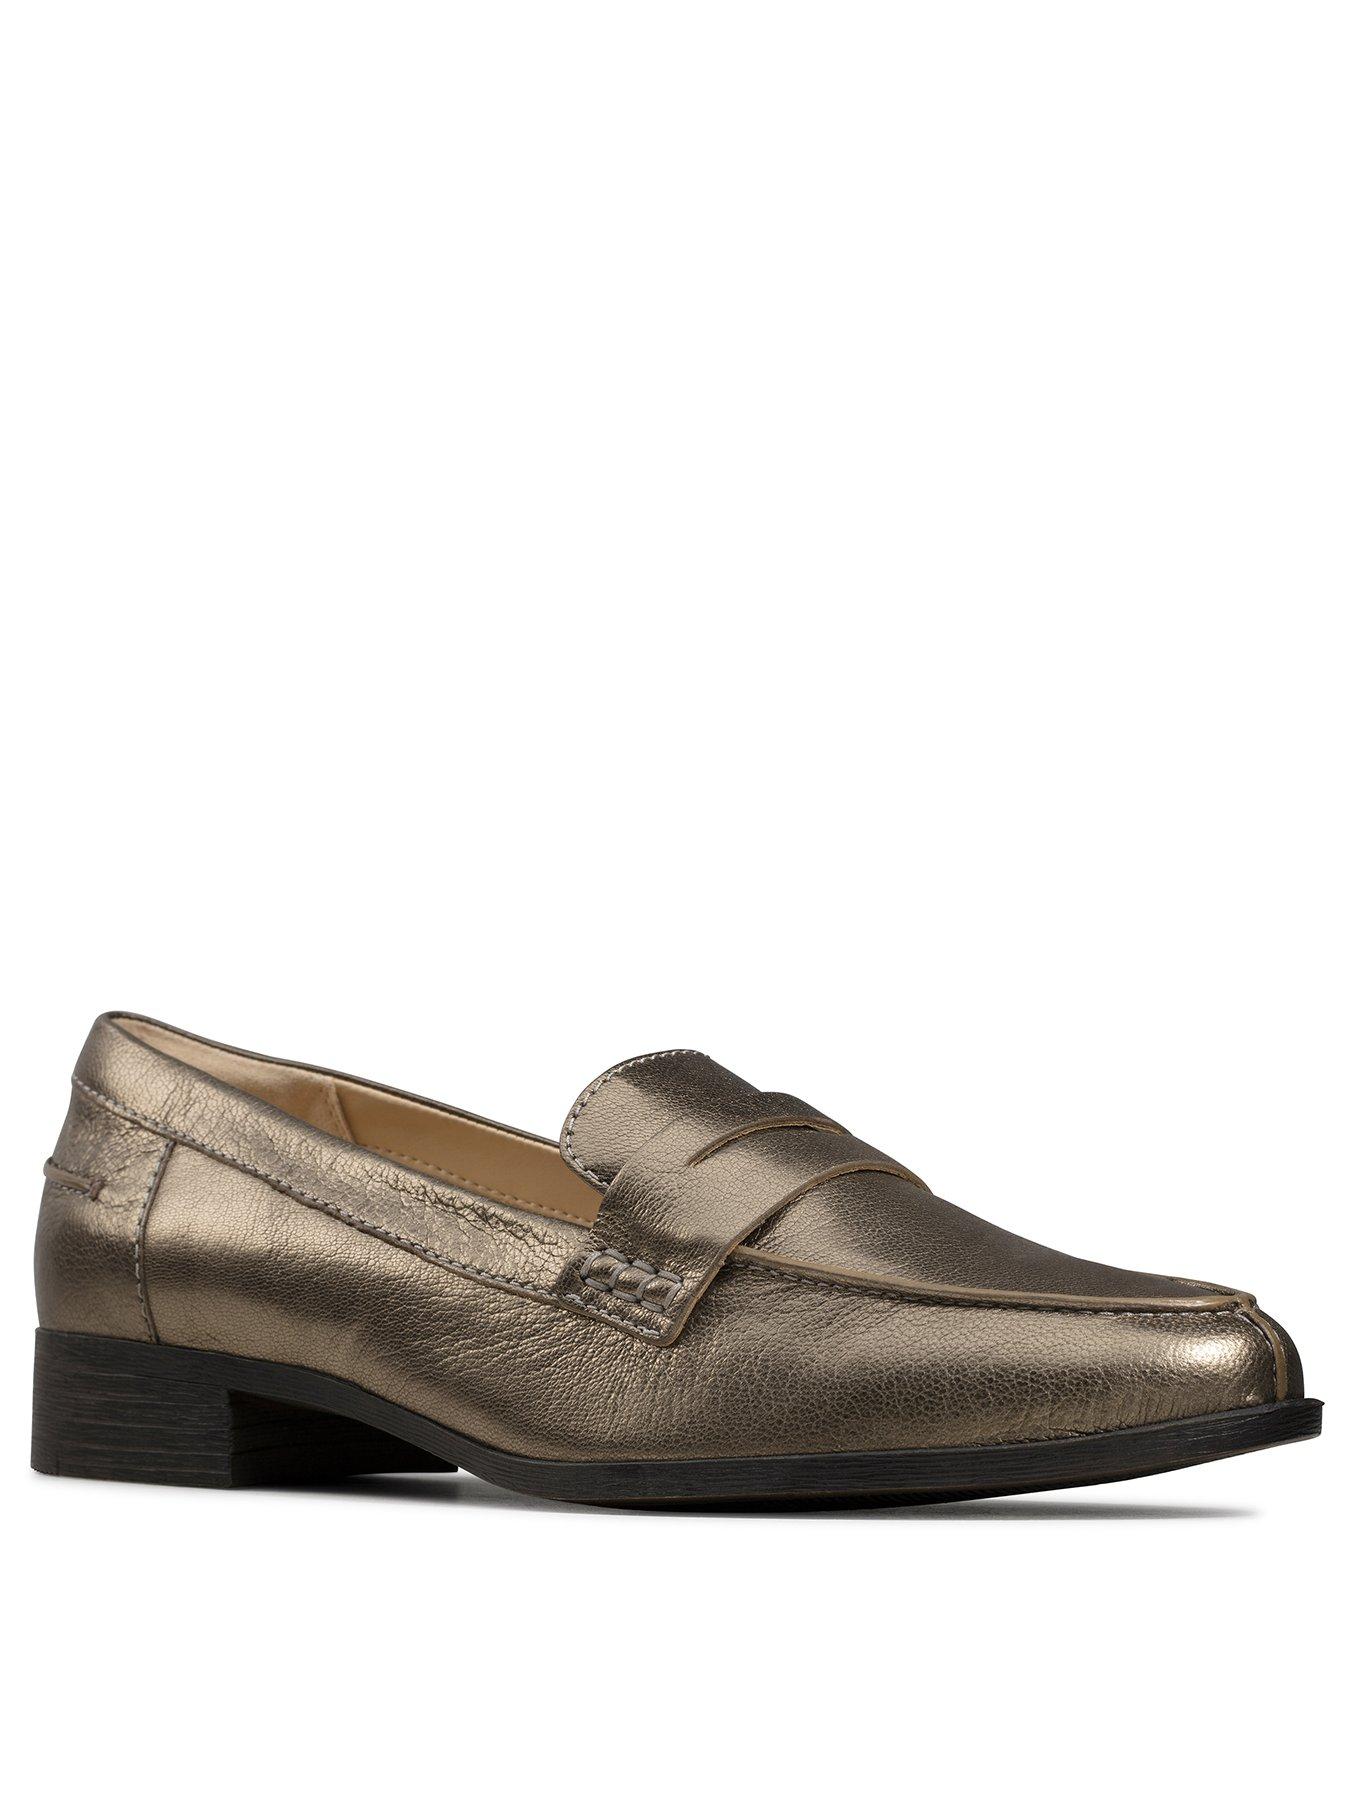 clarks shoes clearance womens